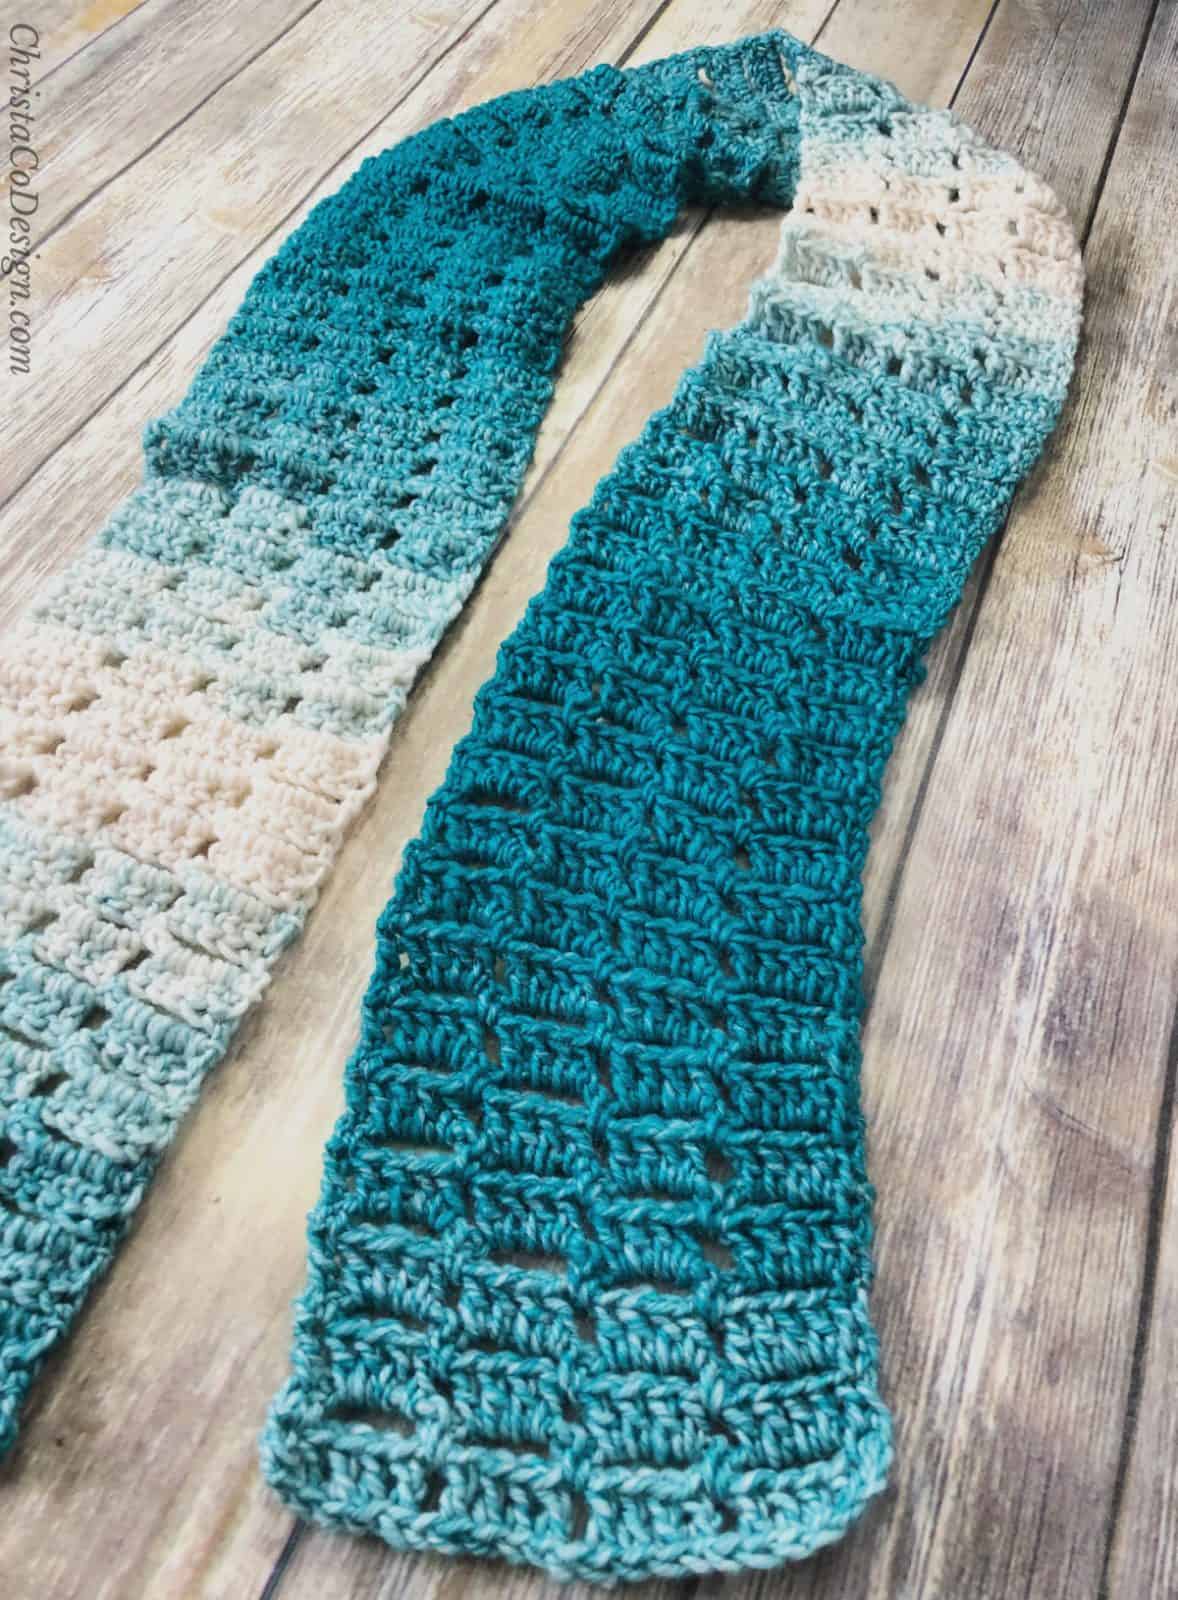 Teal and white crochet scarf laid out in u shape.